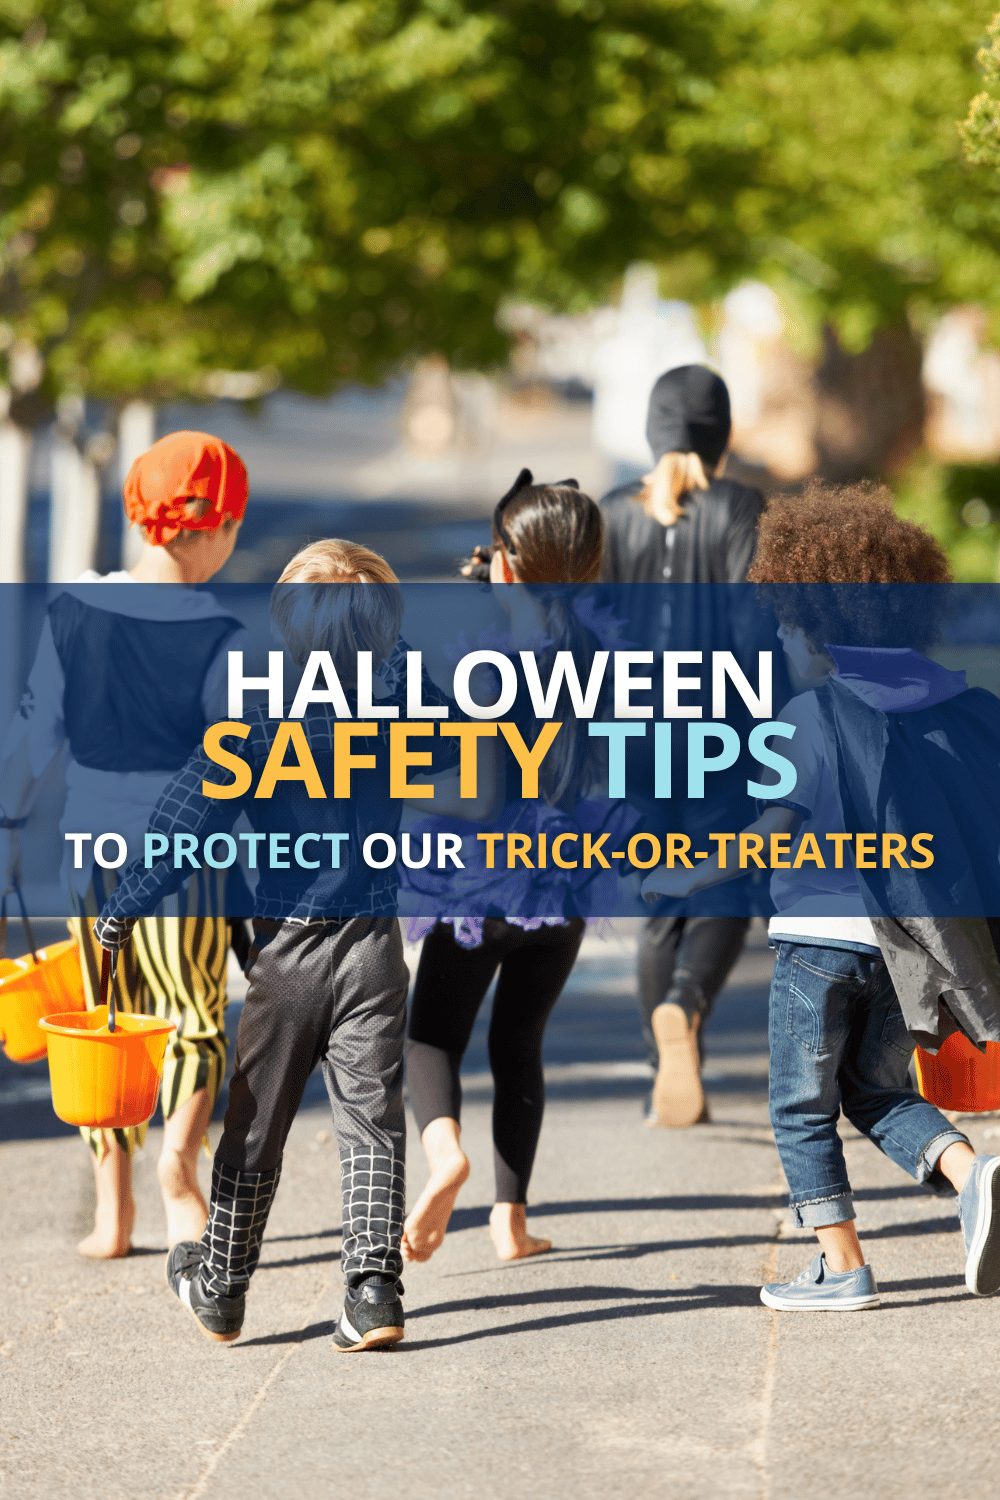 Halloween Safety Tips To Protect Our Trick-or-Treaters